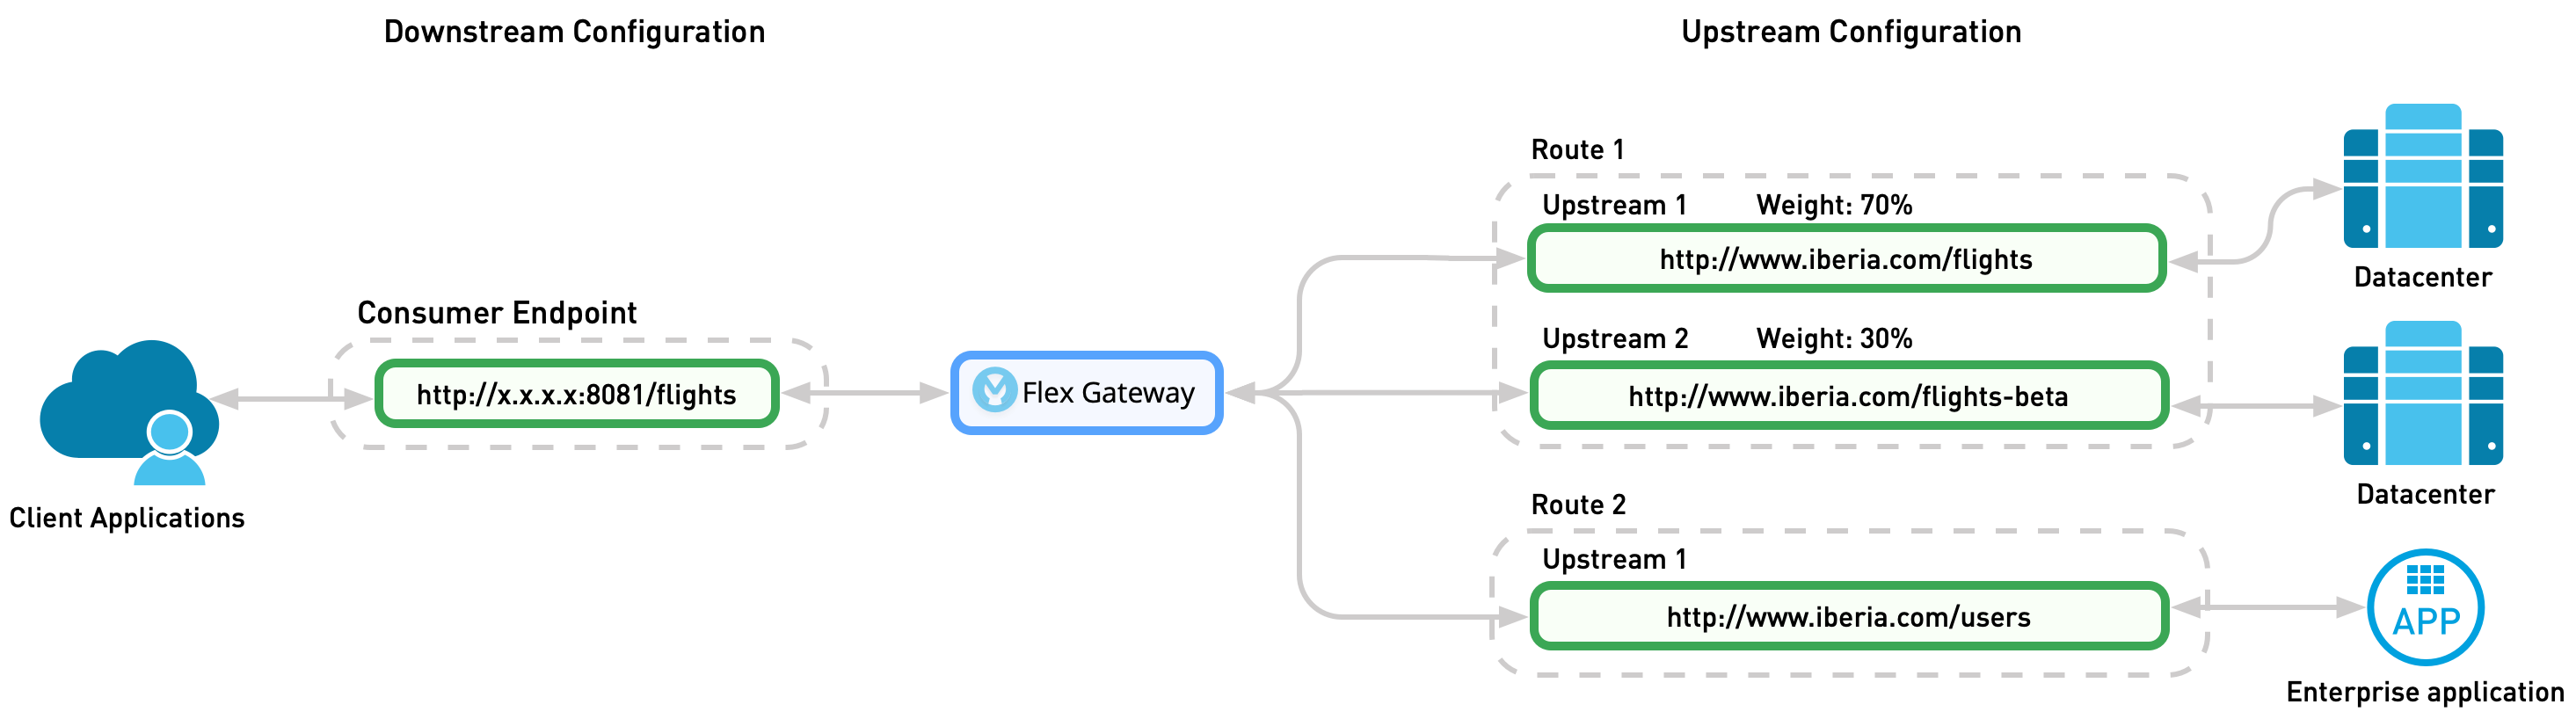 Flex Gateway manages the traffic to multiple upstream services.